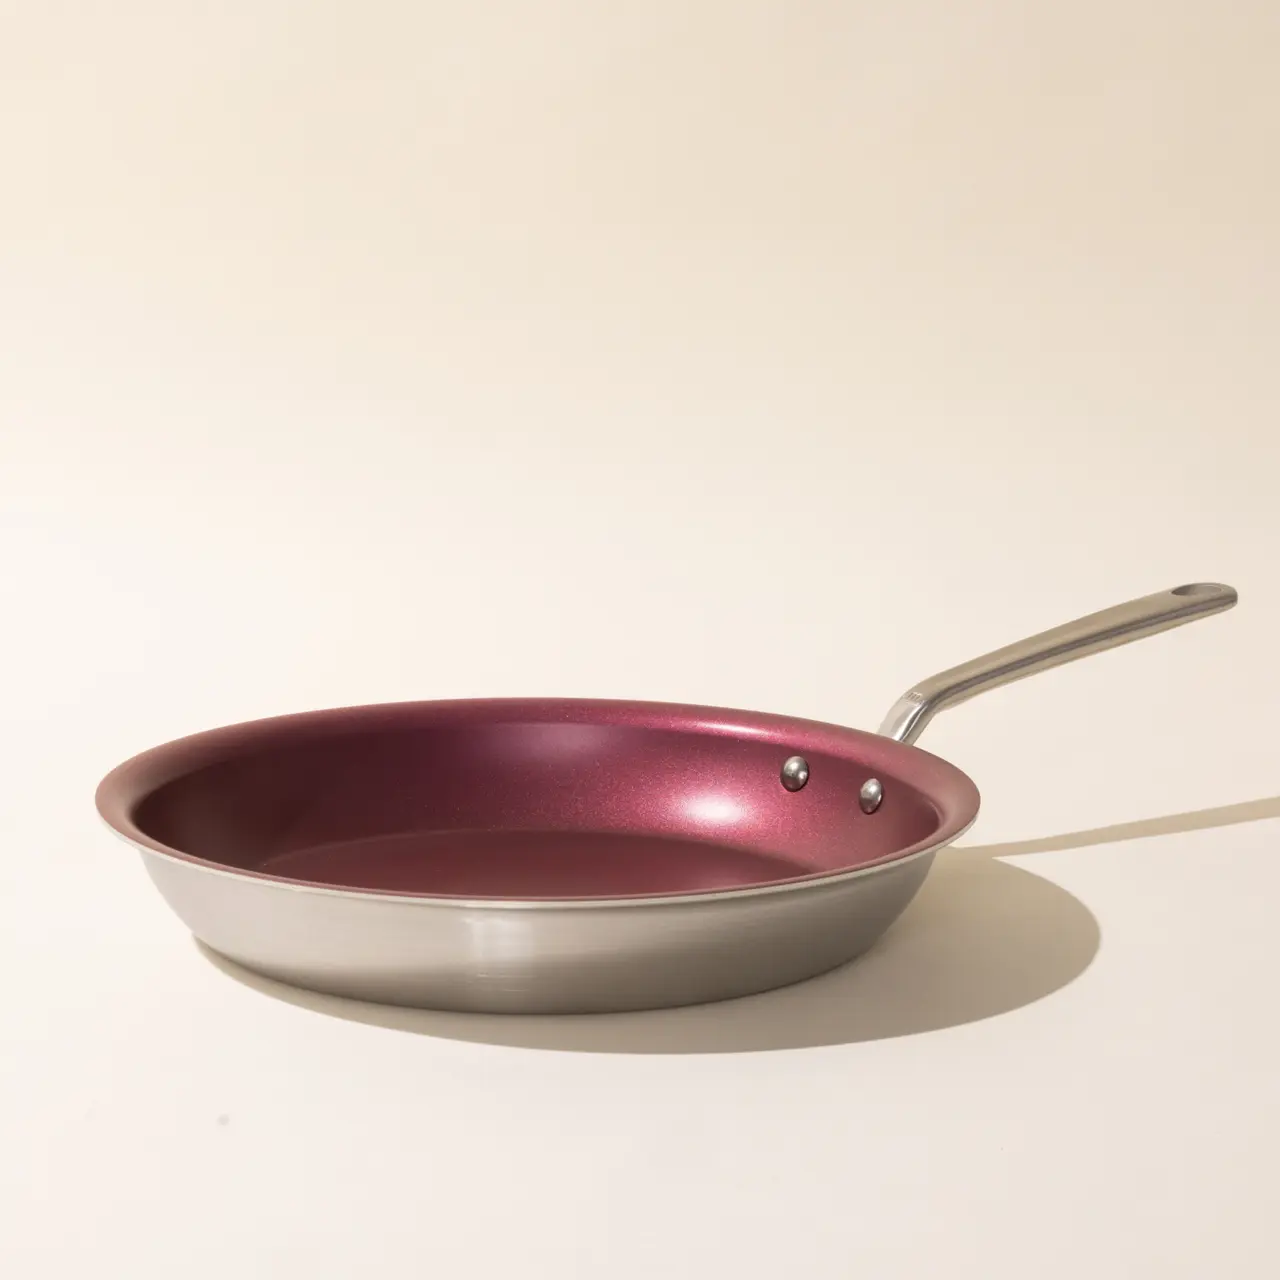 A new non-stick frying pan with a stainless steel handle on a light background.